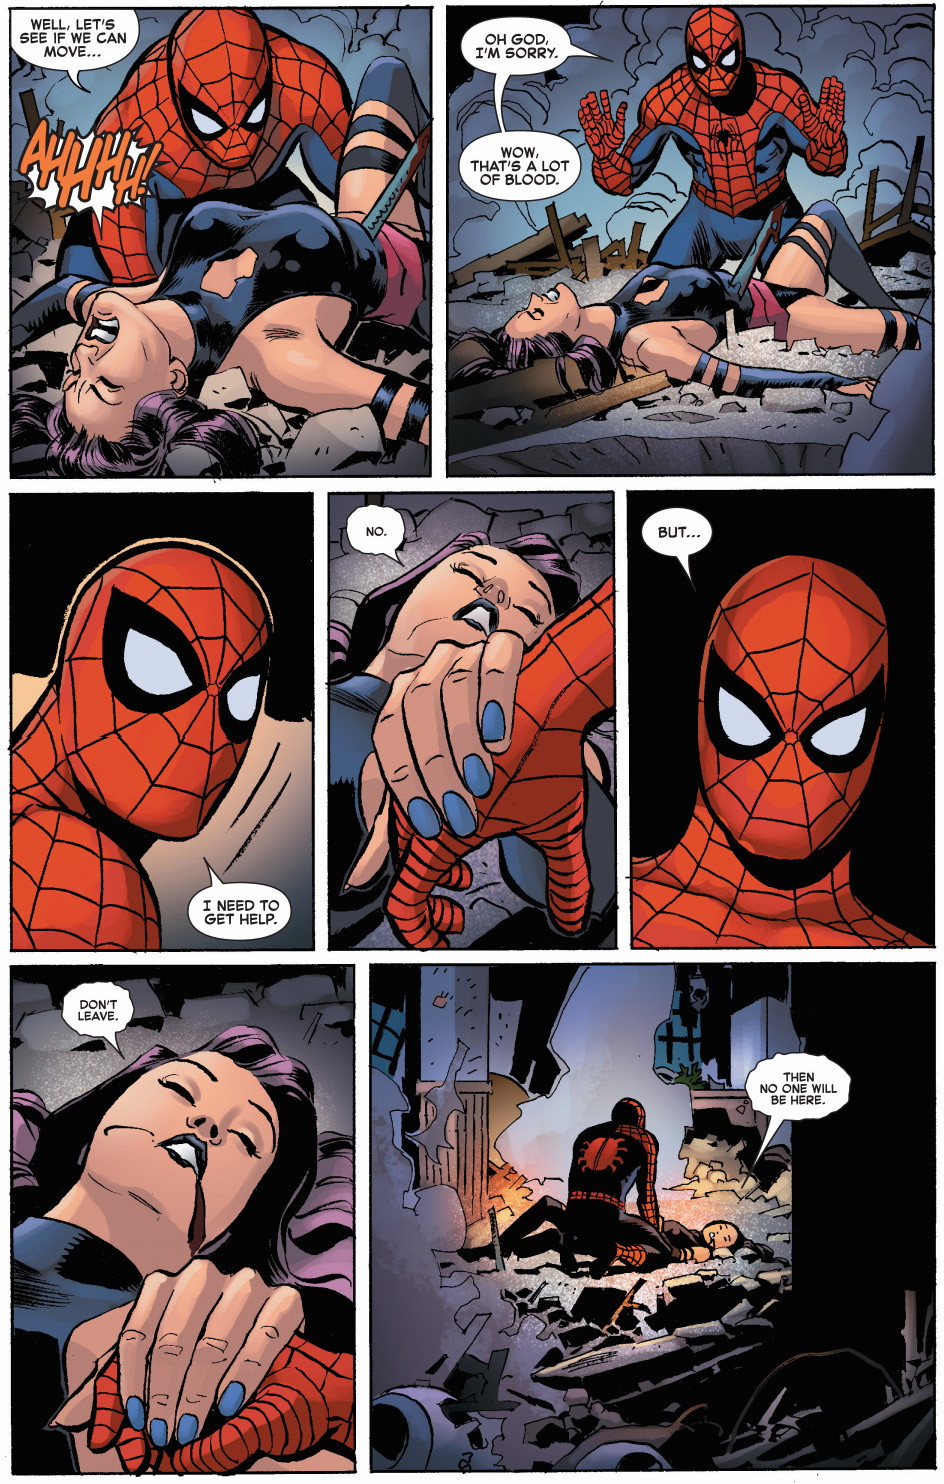 spider-man comforts a dying psylocke